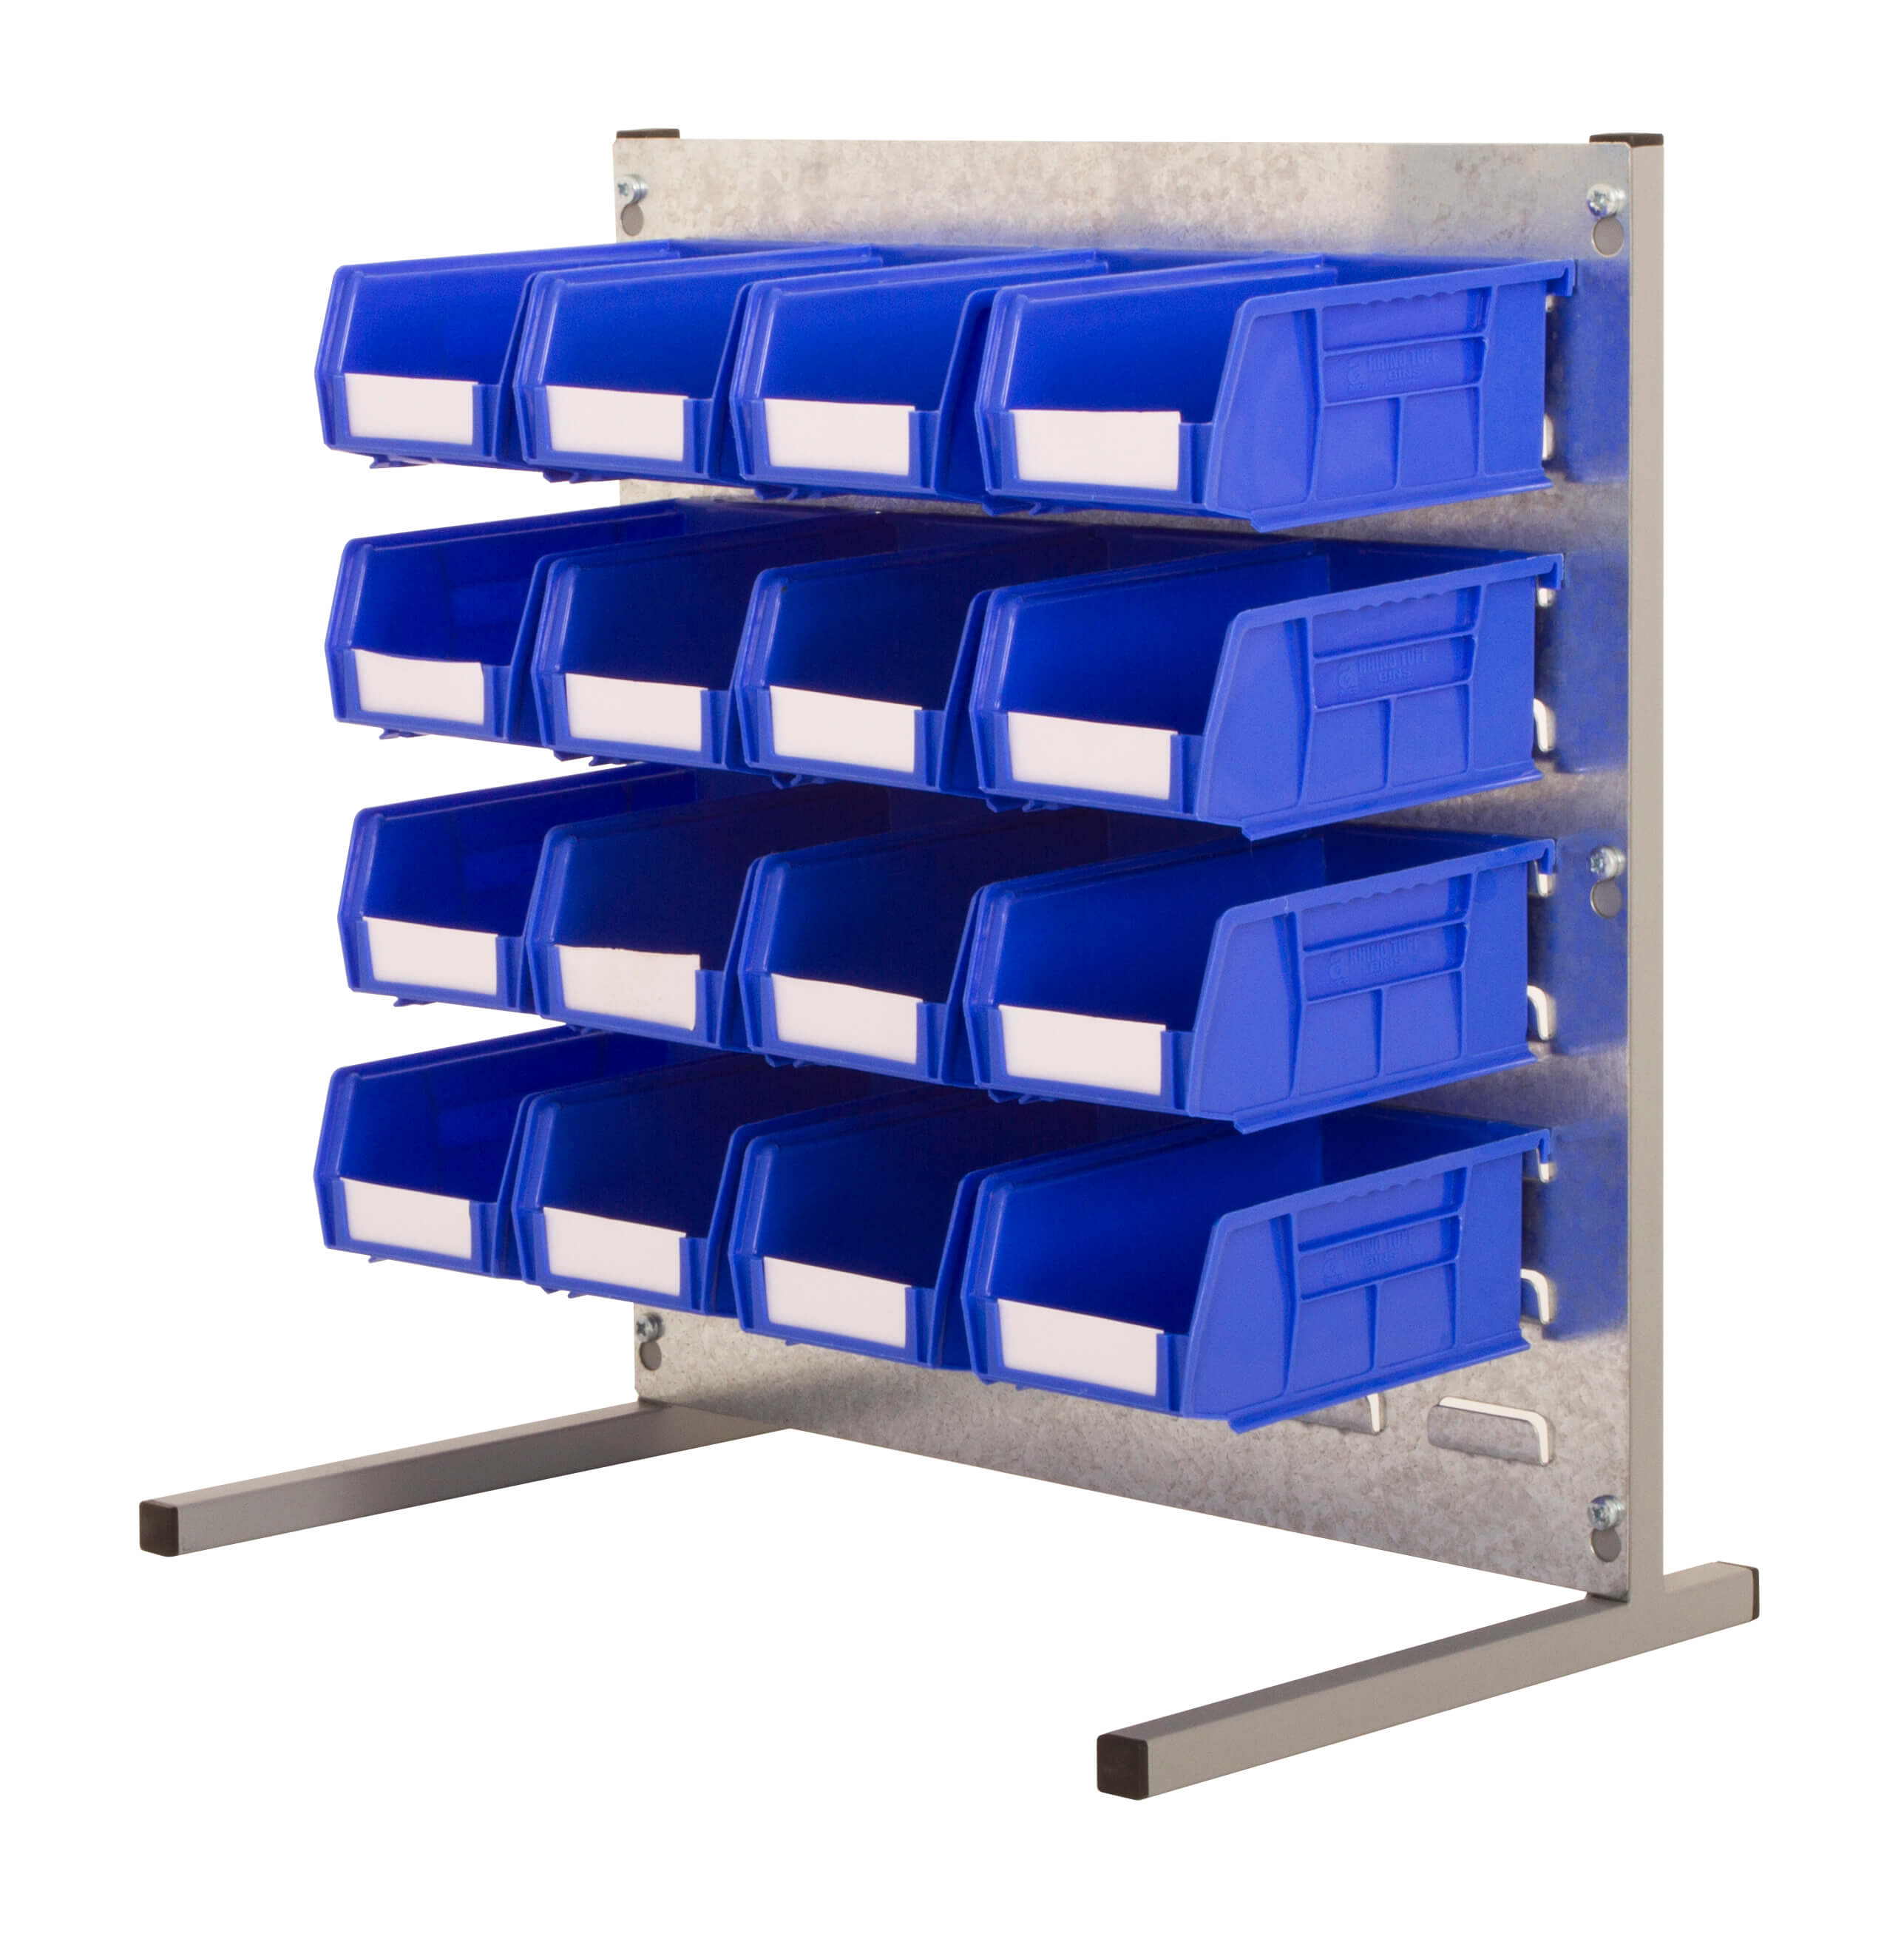 UK Suppliers of Plastic Bin Louvre Bench Stand Kits